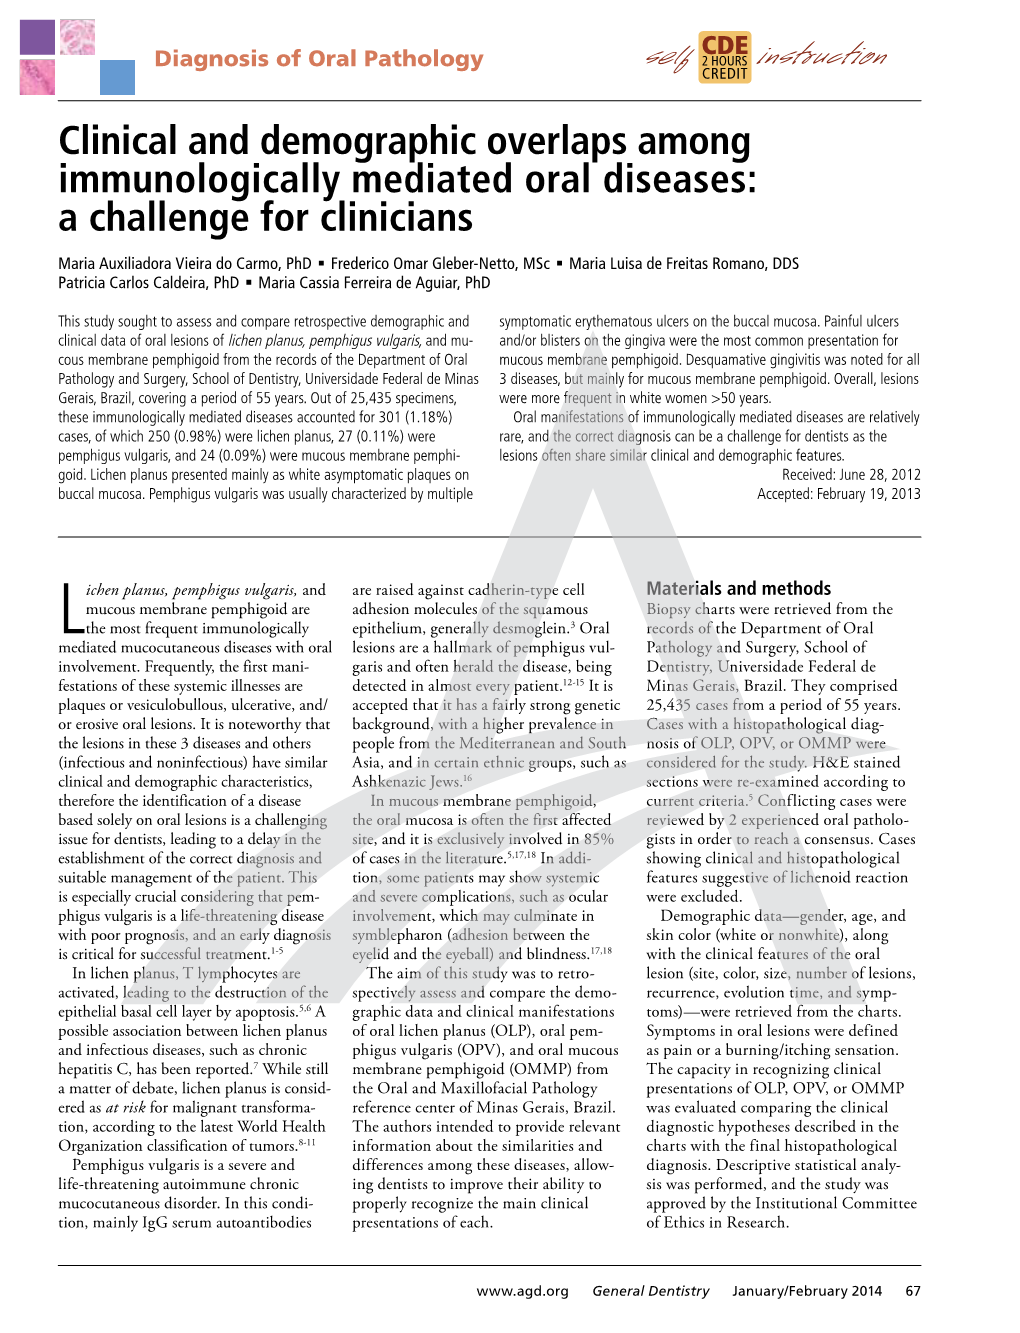 Clinical and Demographic Overlaps Among Immunologically Mediated Oral Diseases: a Challenge for Clinicians